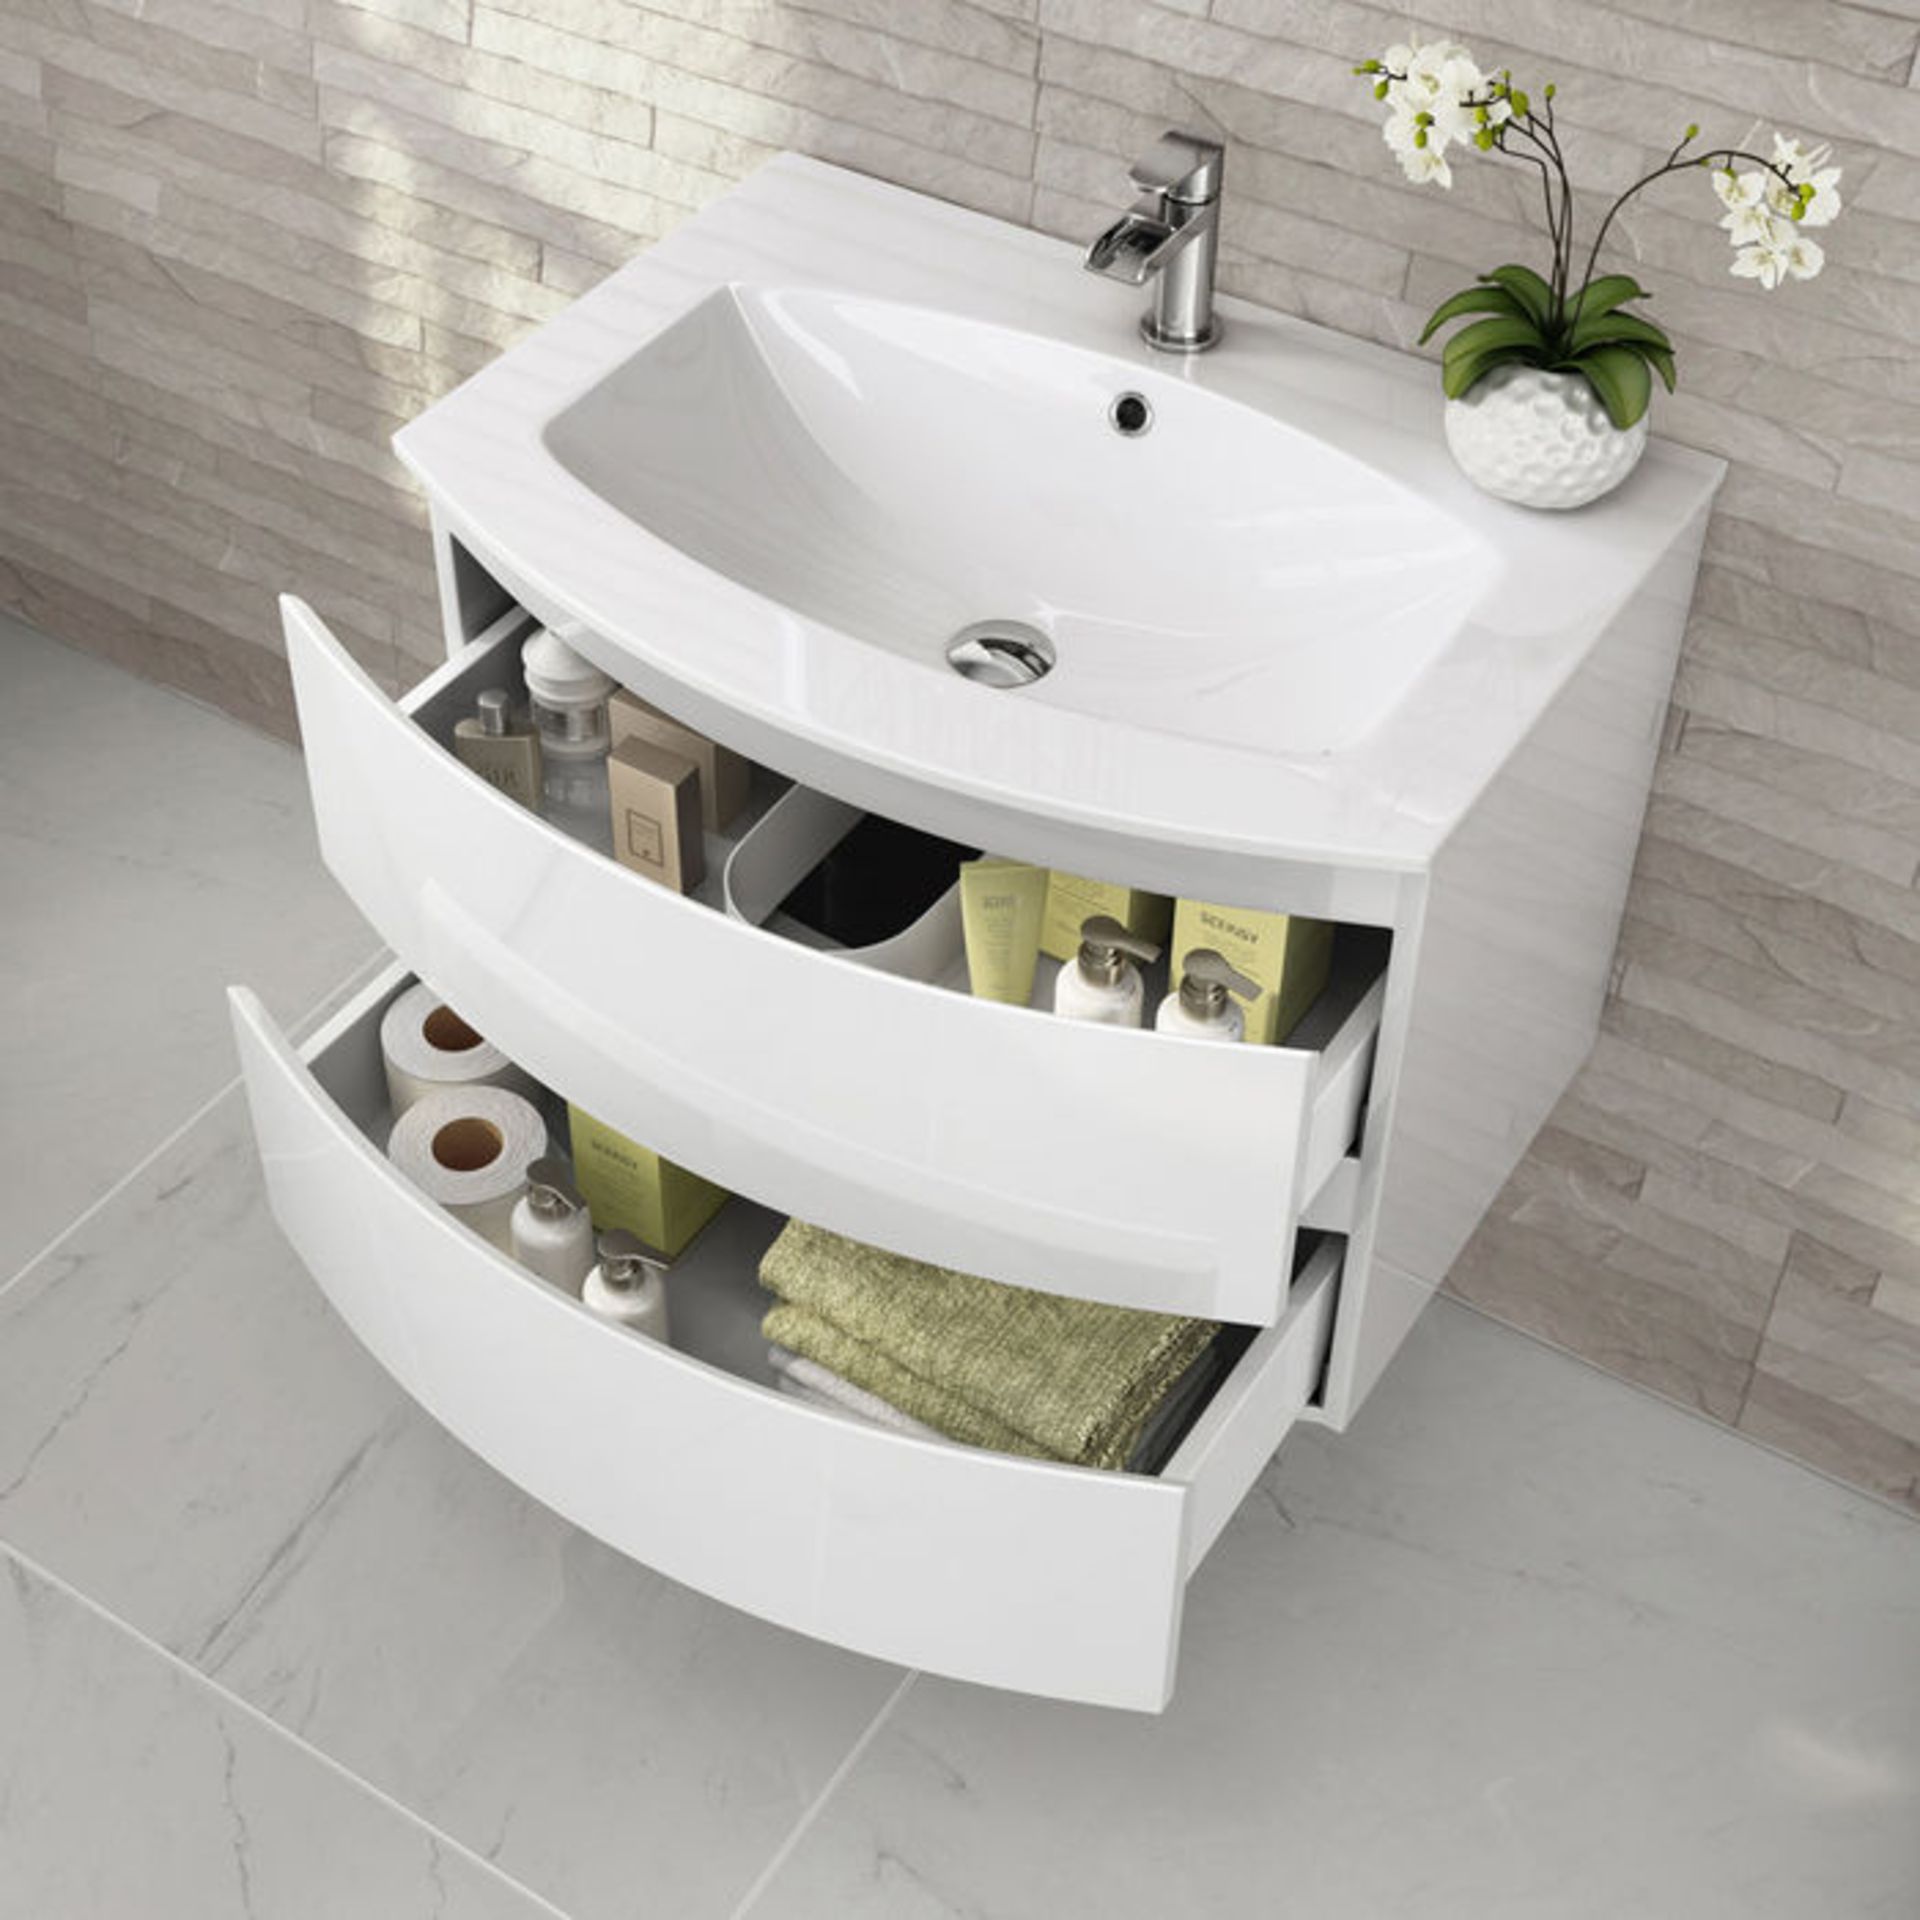 700mm Amelie High Gloss White Curved Vanity Unit - Wall Hung. RRP £749.99. Comes complete with... - Image 2 of 4